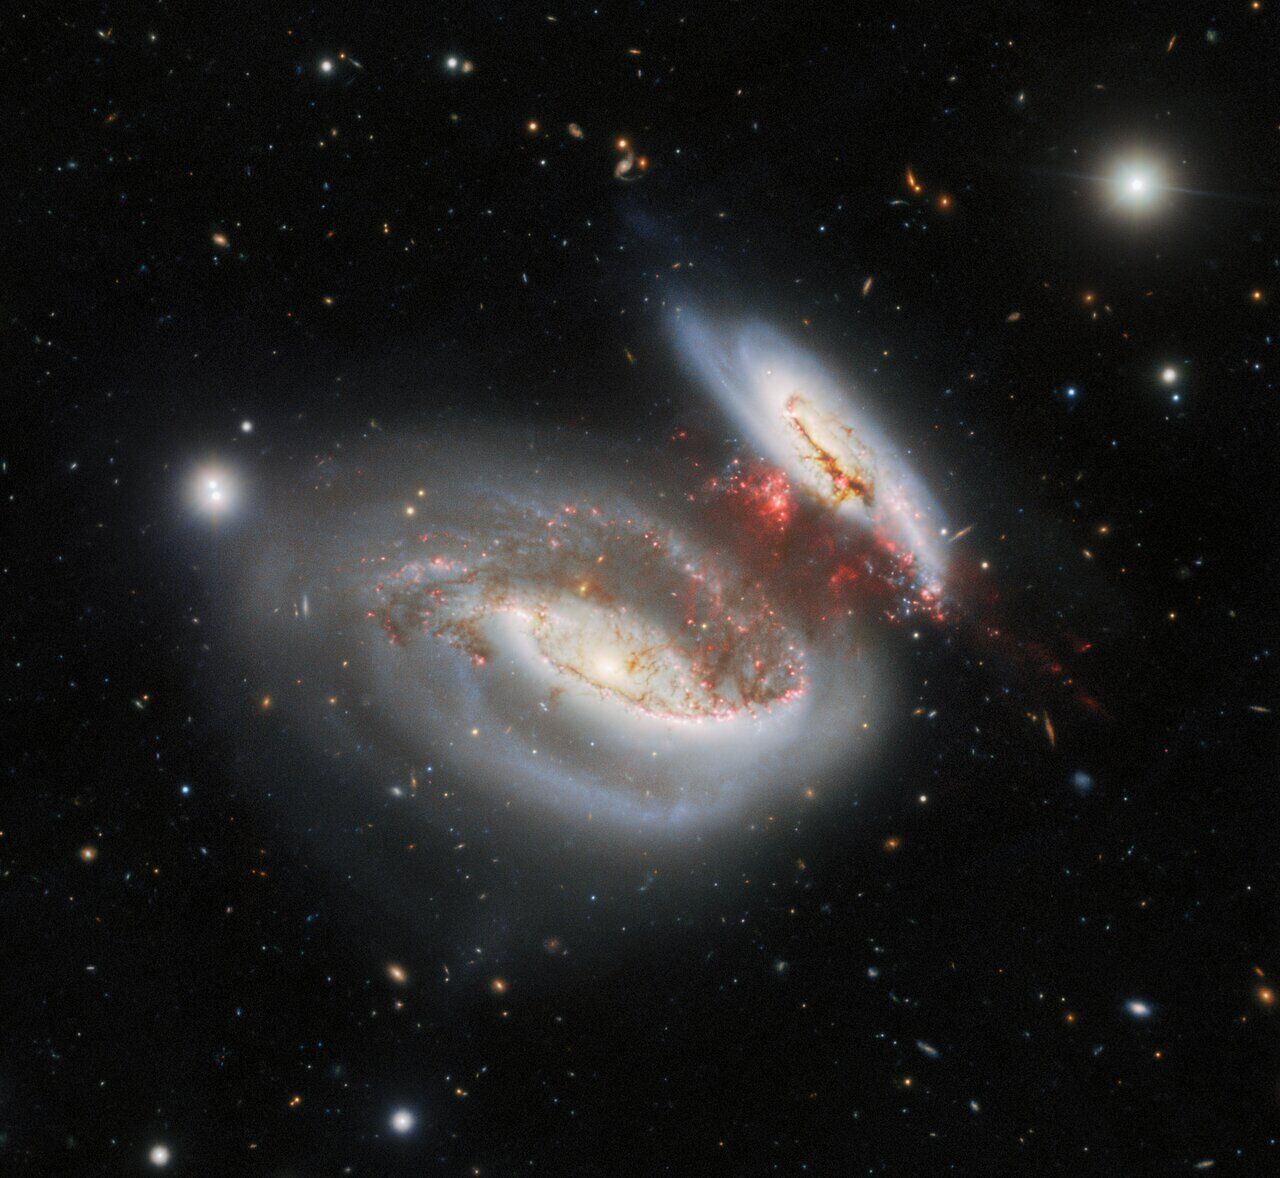 The result of a collision between two galaxies.